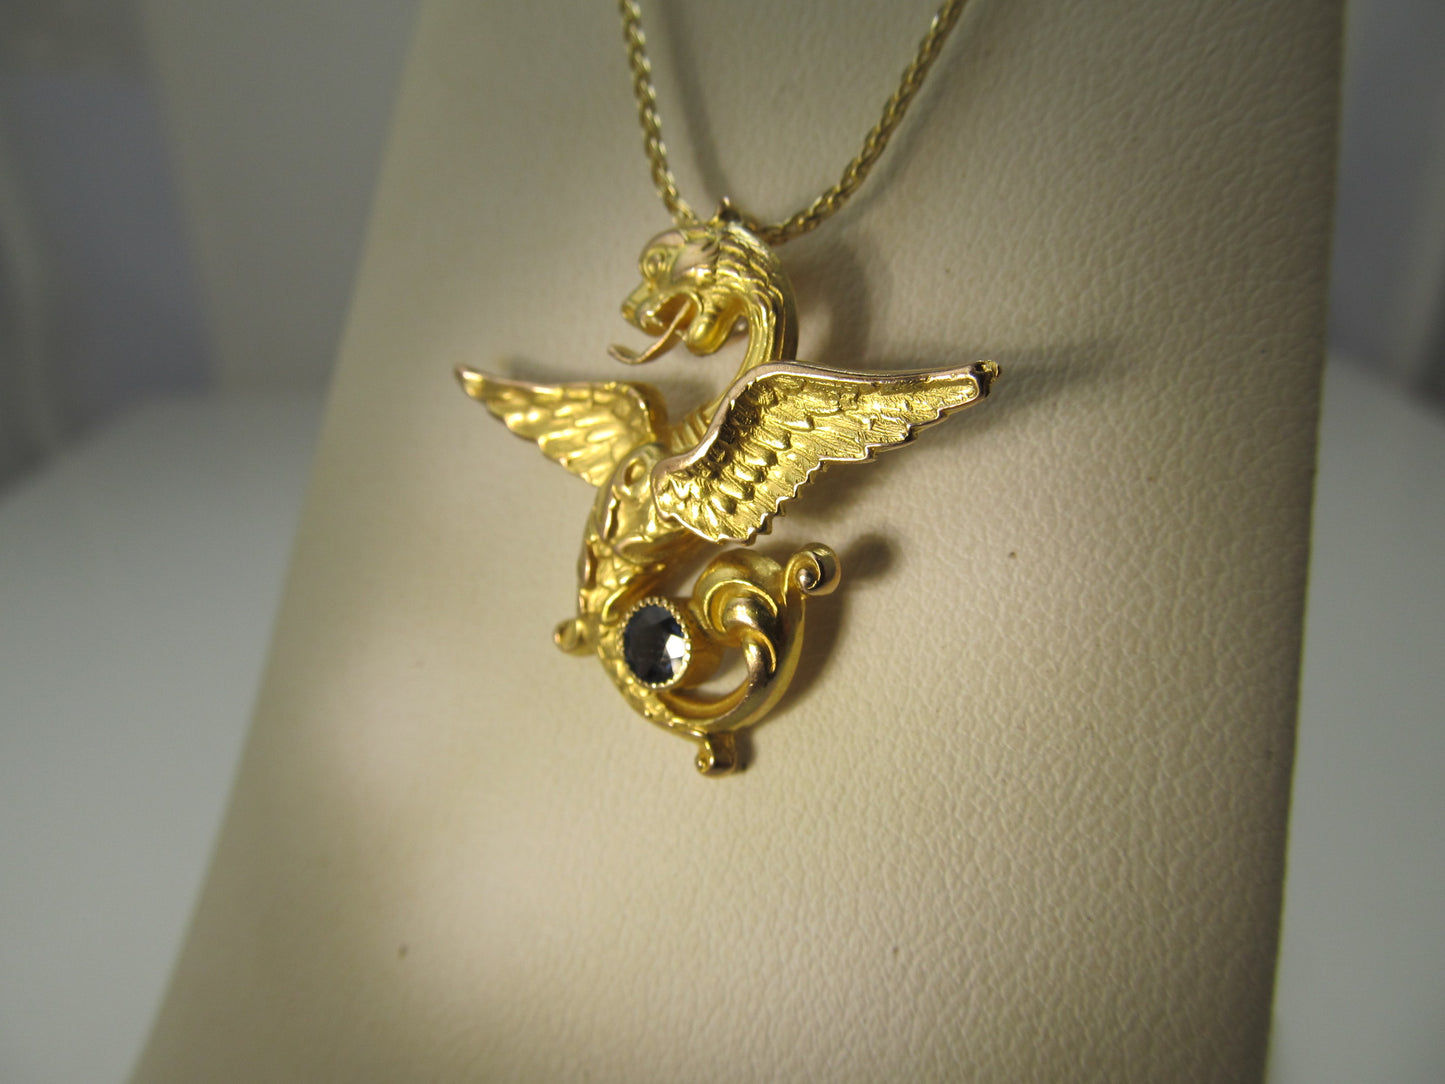 Antique 14k yellow gold griffin necklace with a sapphire, circa 1900